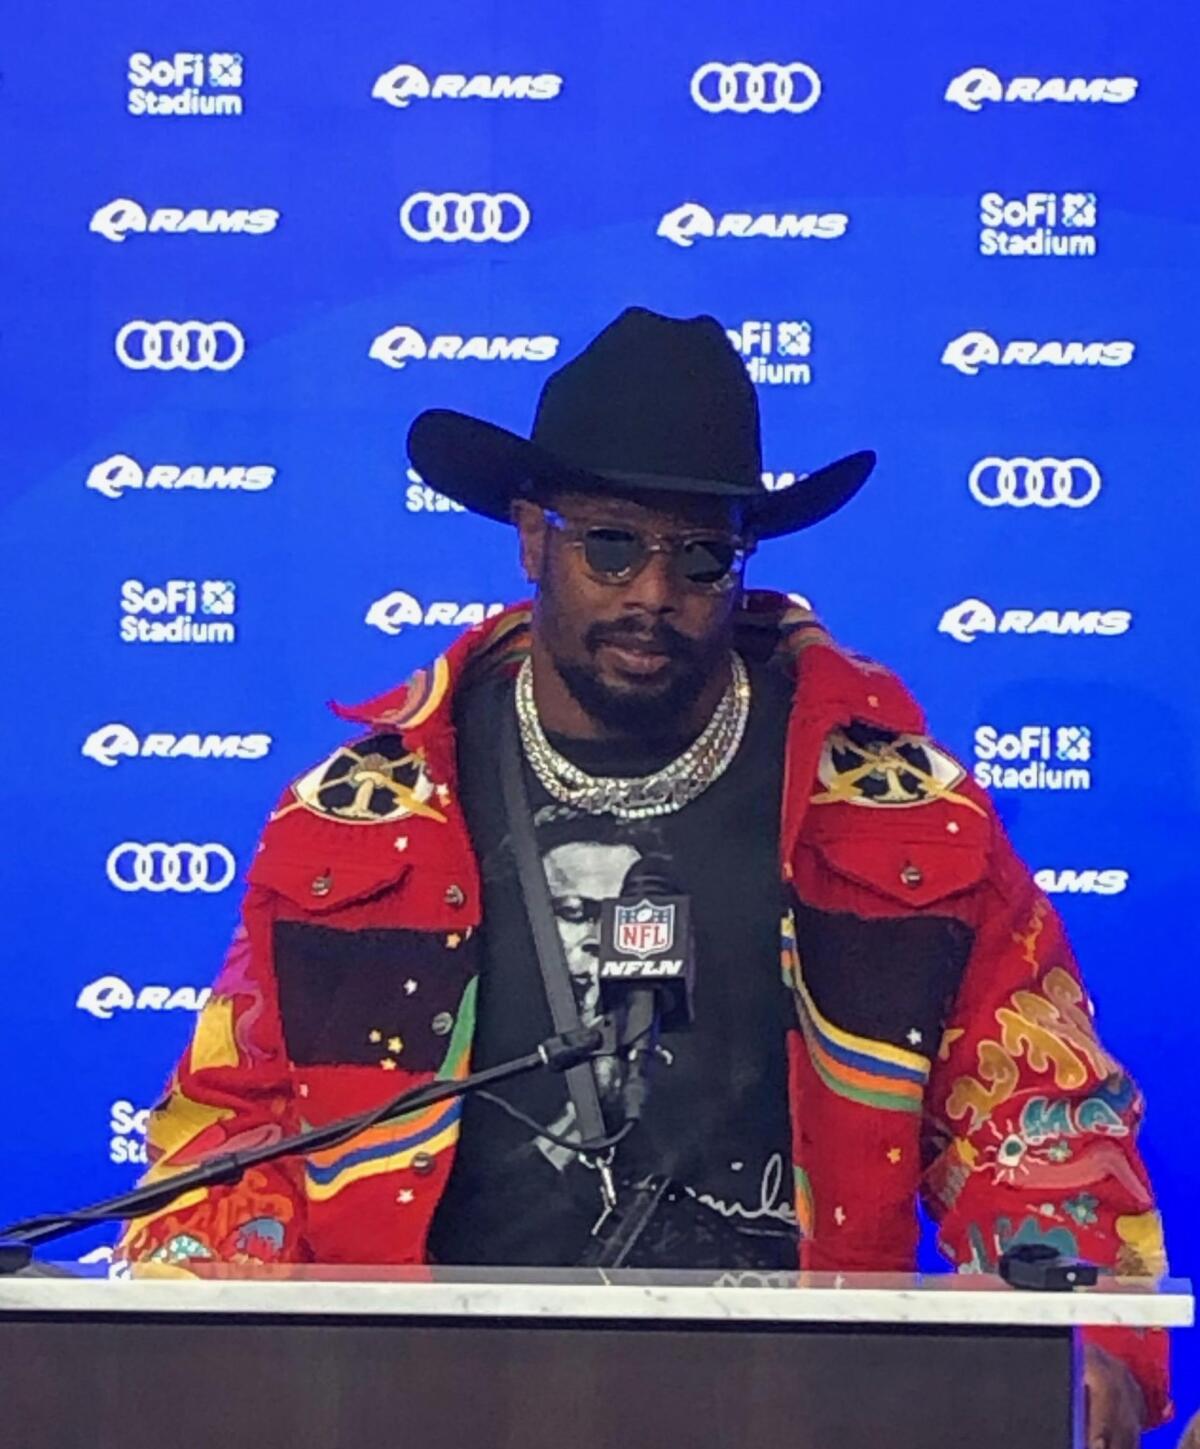 Von Miller stands on a podium wearing a flashy outfit that includes a cowboy hat, multicolored jacket and sunglasses